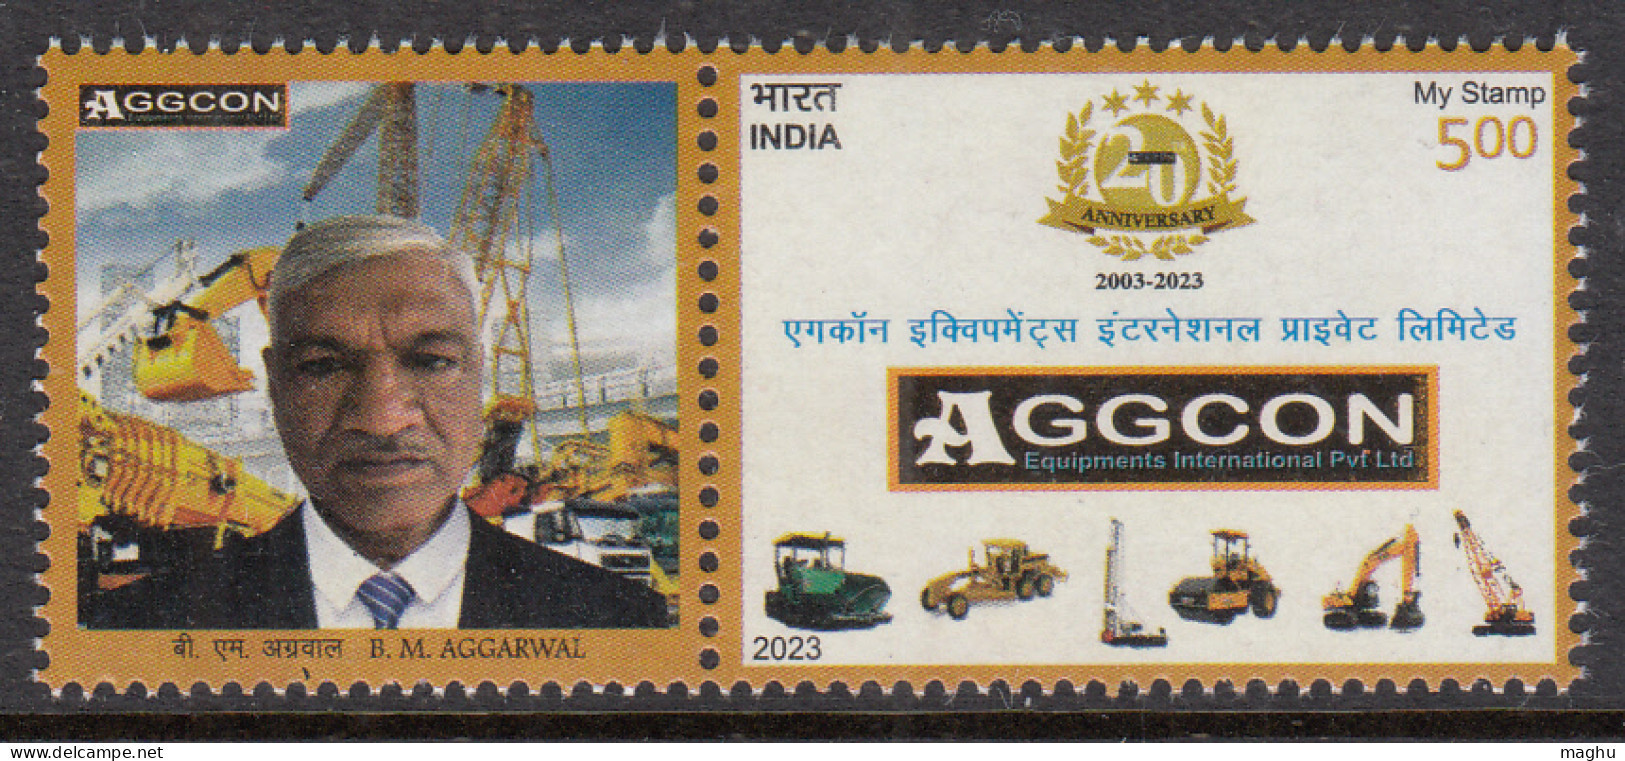 My Stamp 2023, AGGCON Mr Agarwal, 'Rental' Equipment  Man, For Mining Mineral Truck Transport Energy Railway, Telecom - Minerales